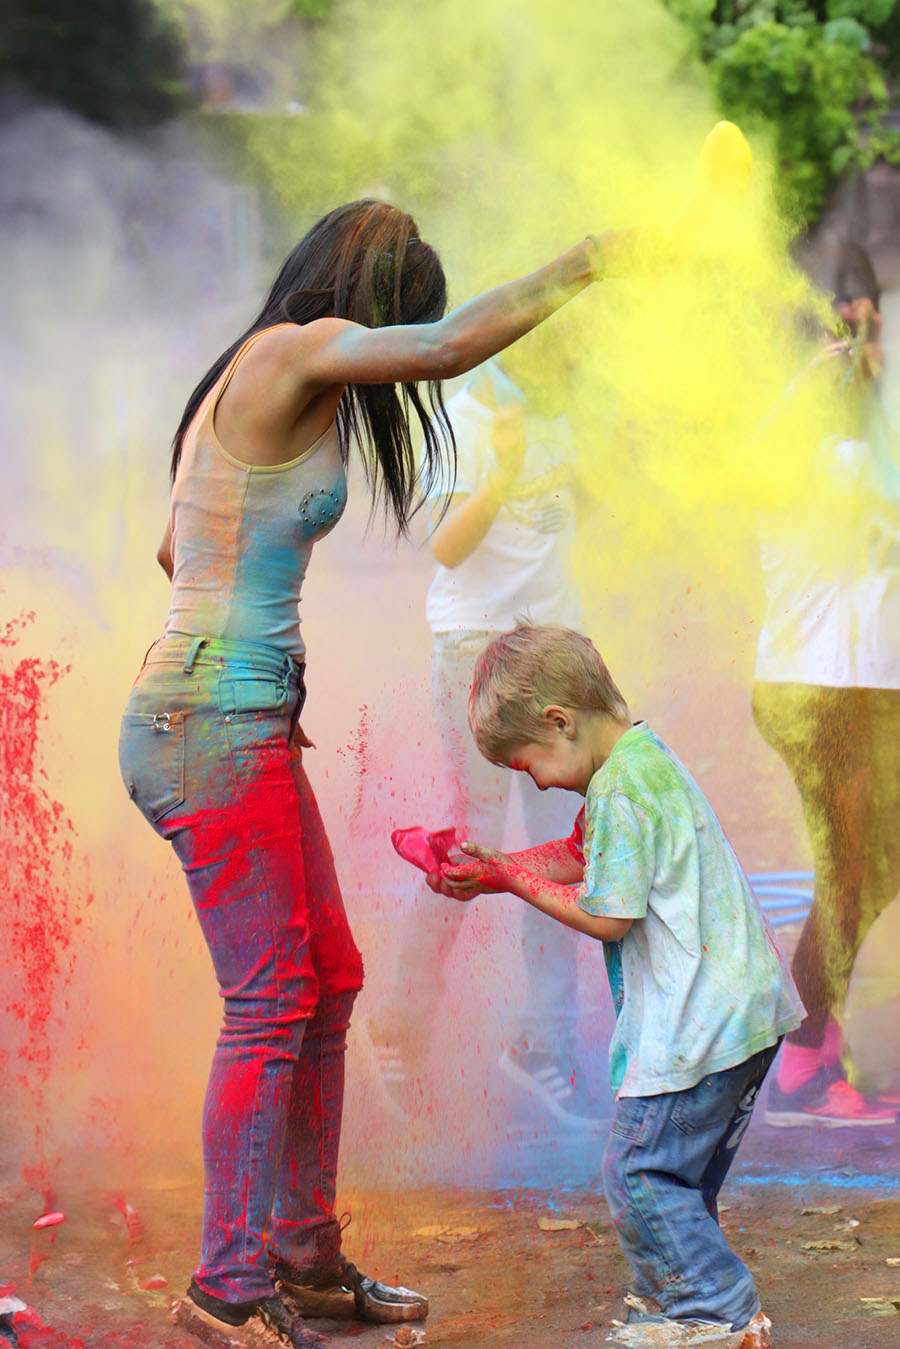 A young woman throwing colored powder in the air, a child doing the same just in front of her. ©2020 Mathieu Improvisato